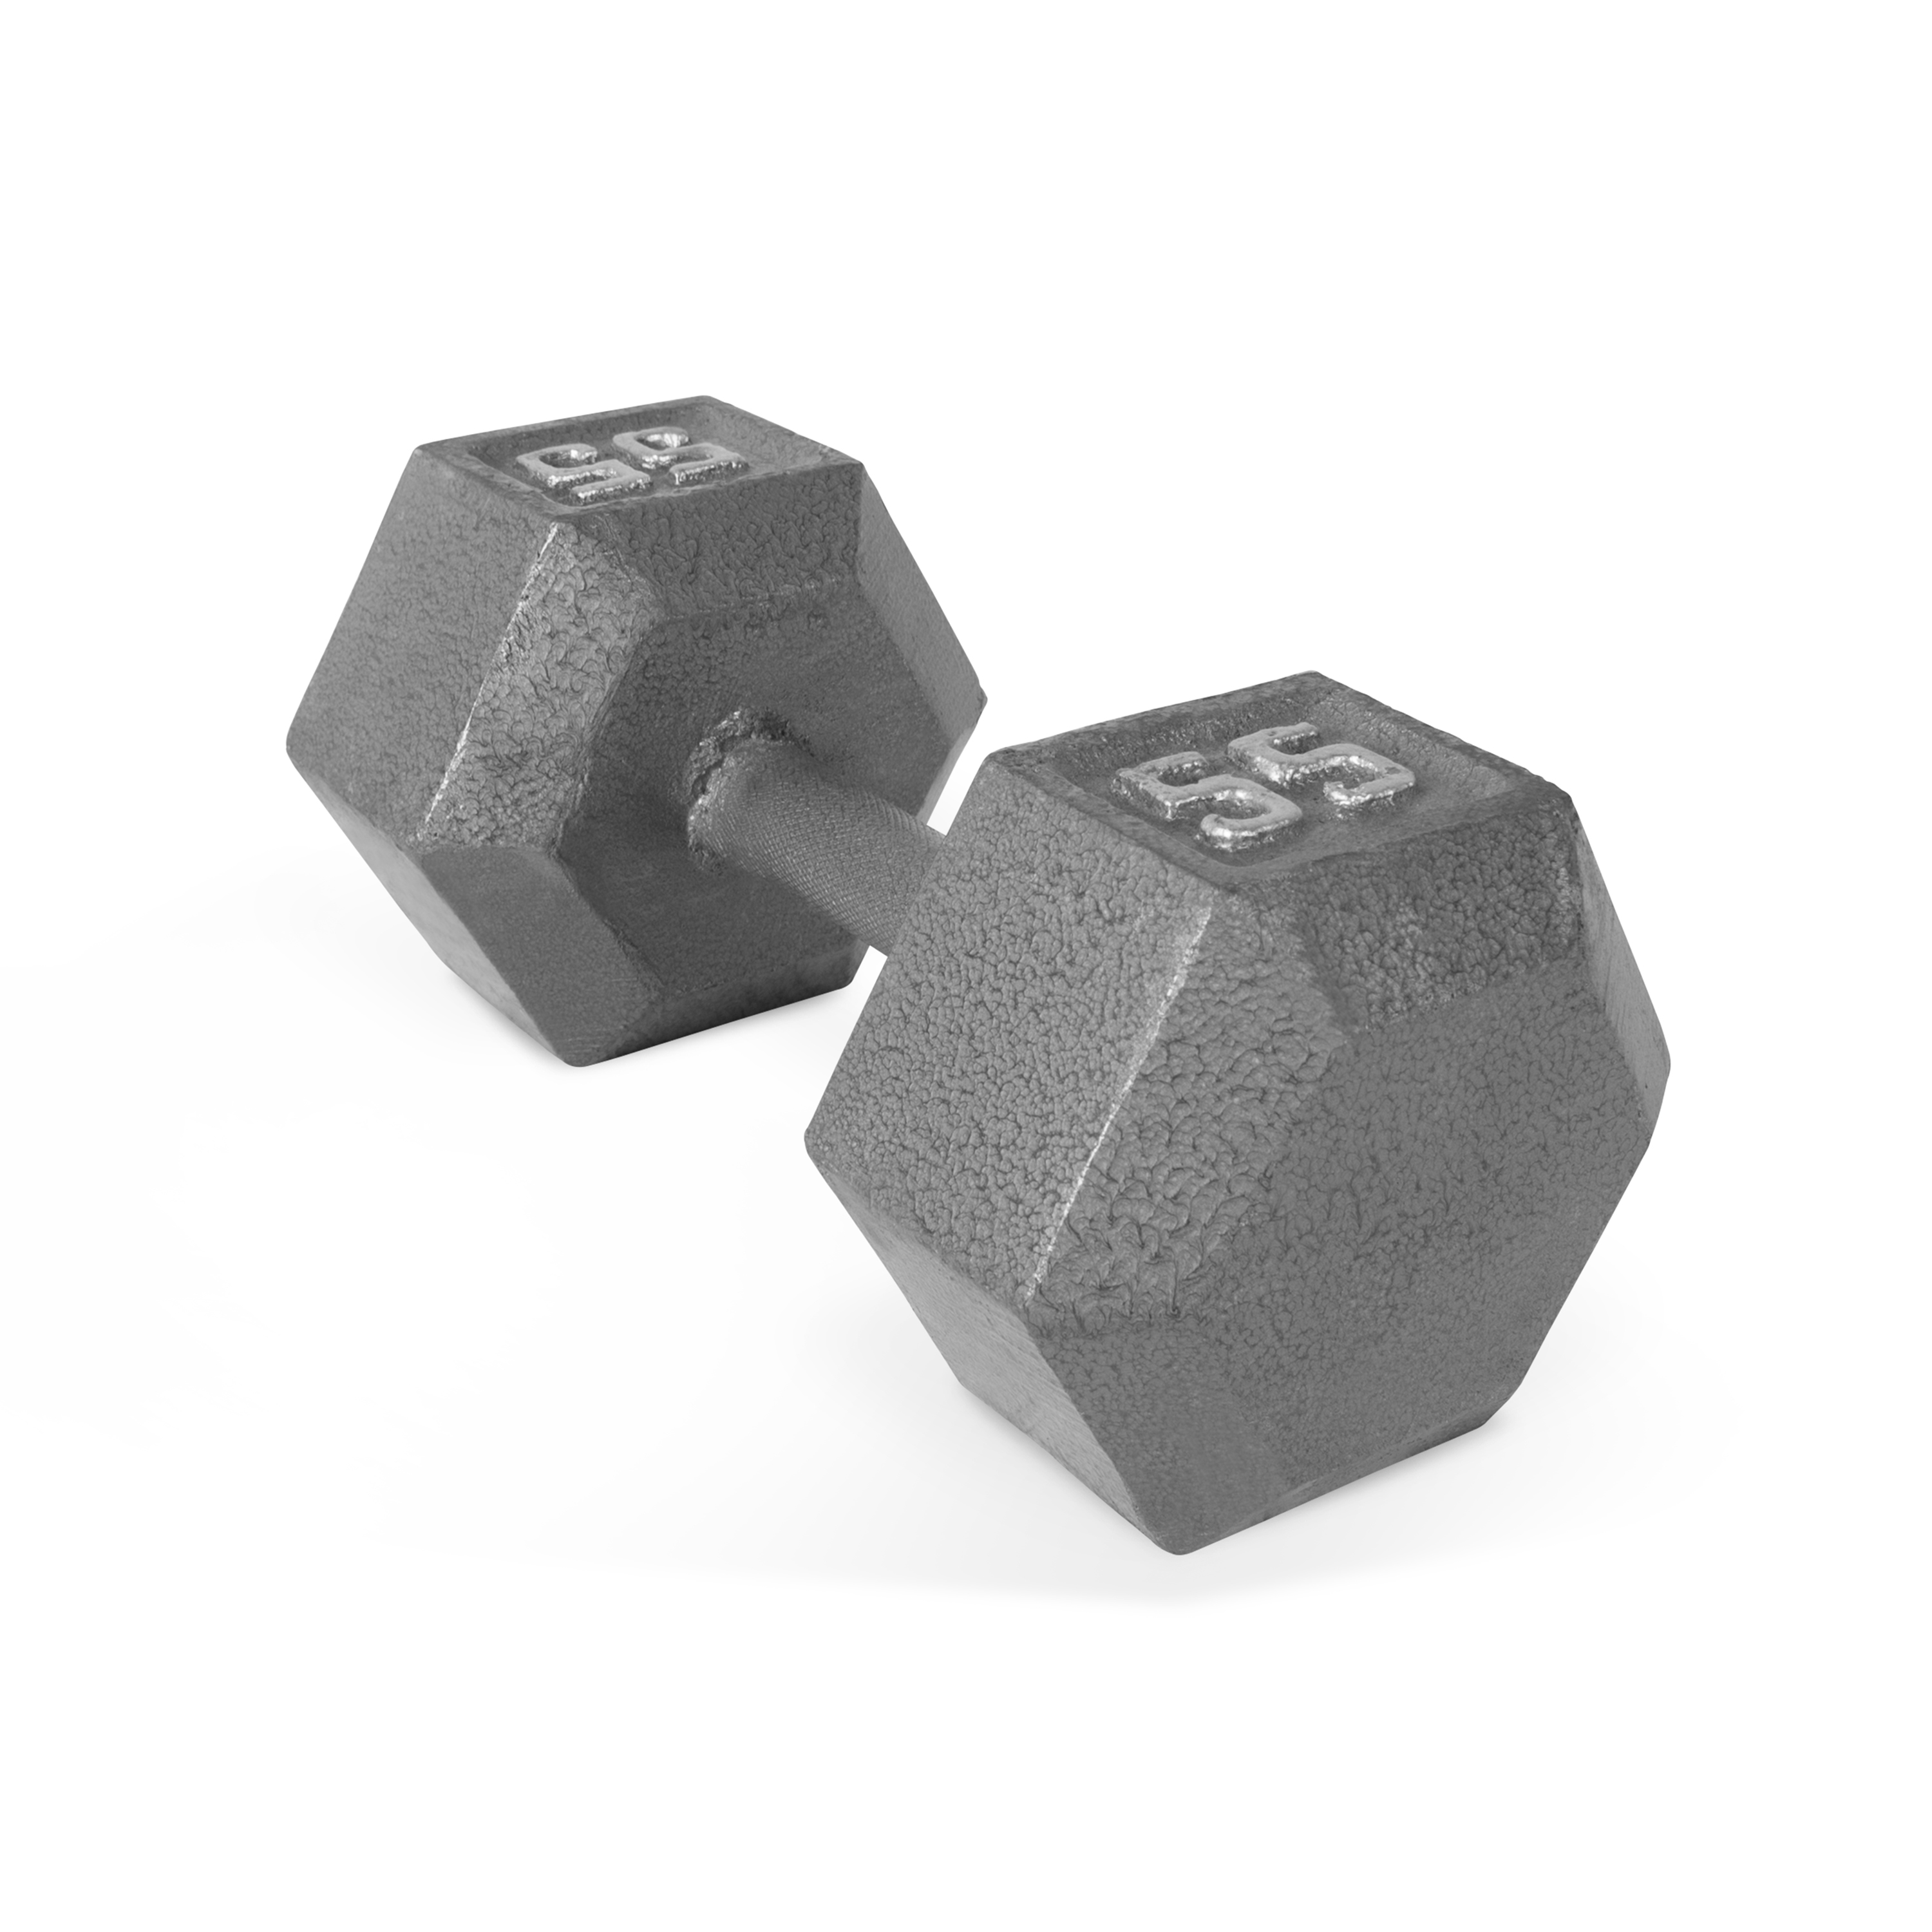 CAP Barbell 55lb Cast Iron Hex Dumbbell, Single - image 1 of 6